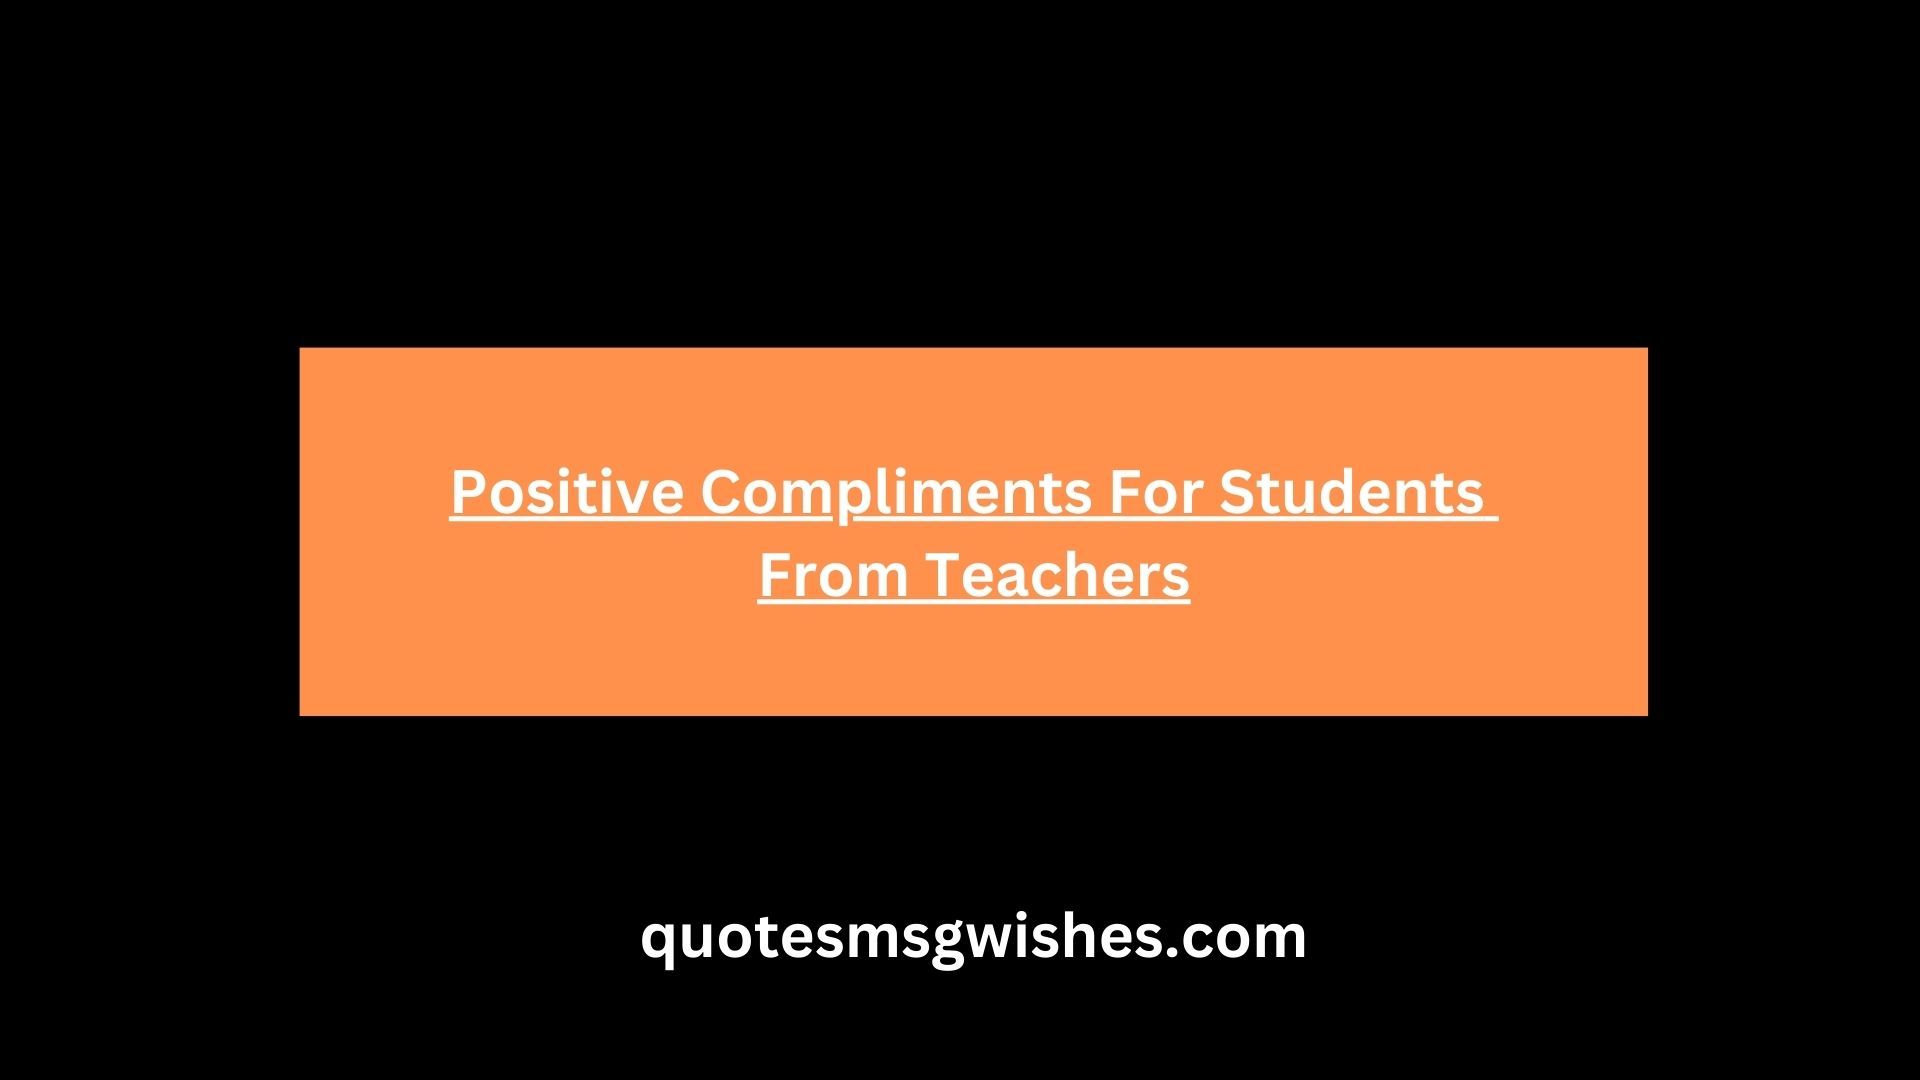 Positive Compliments For Students From Teachers